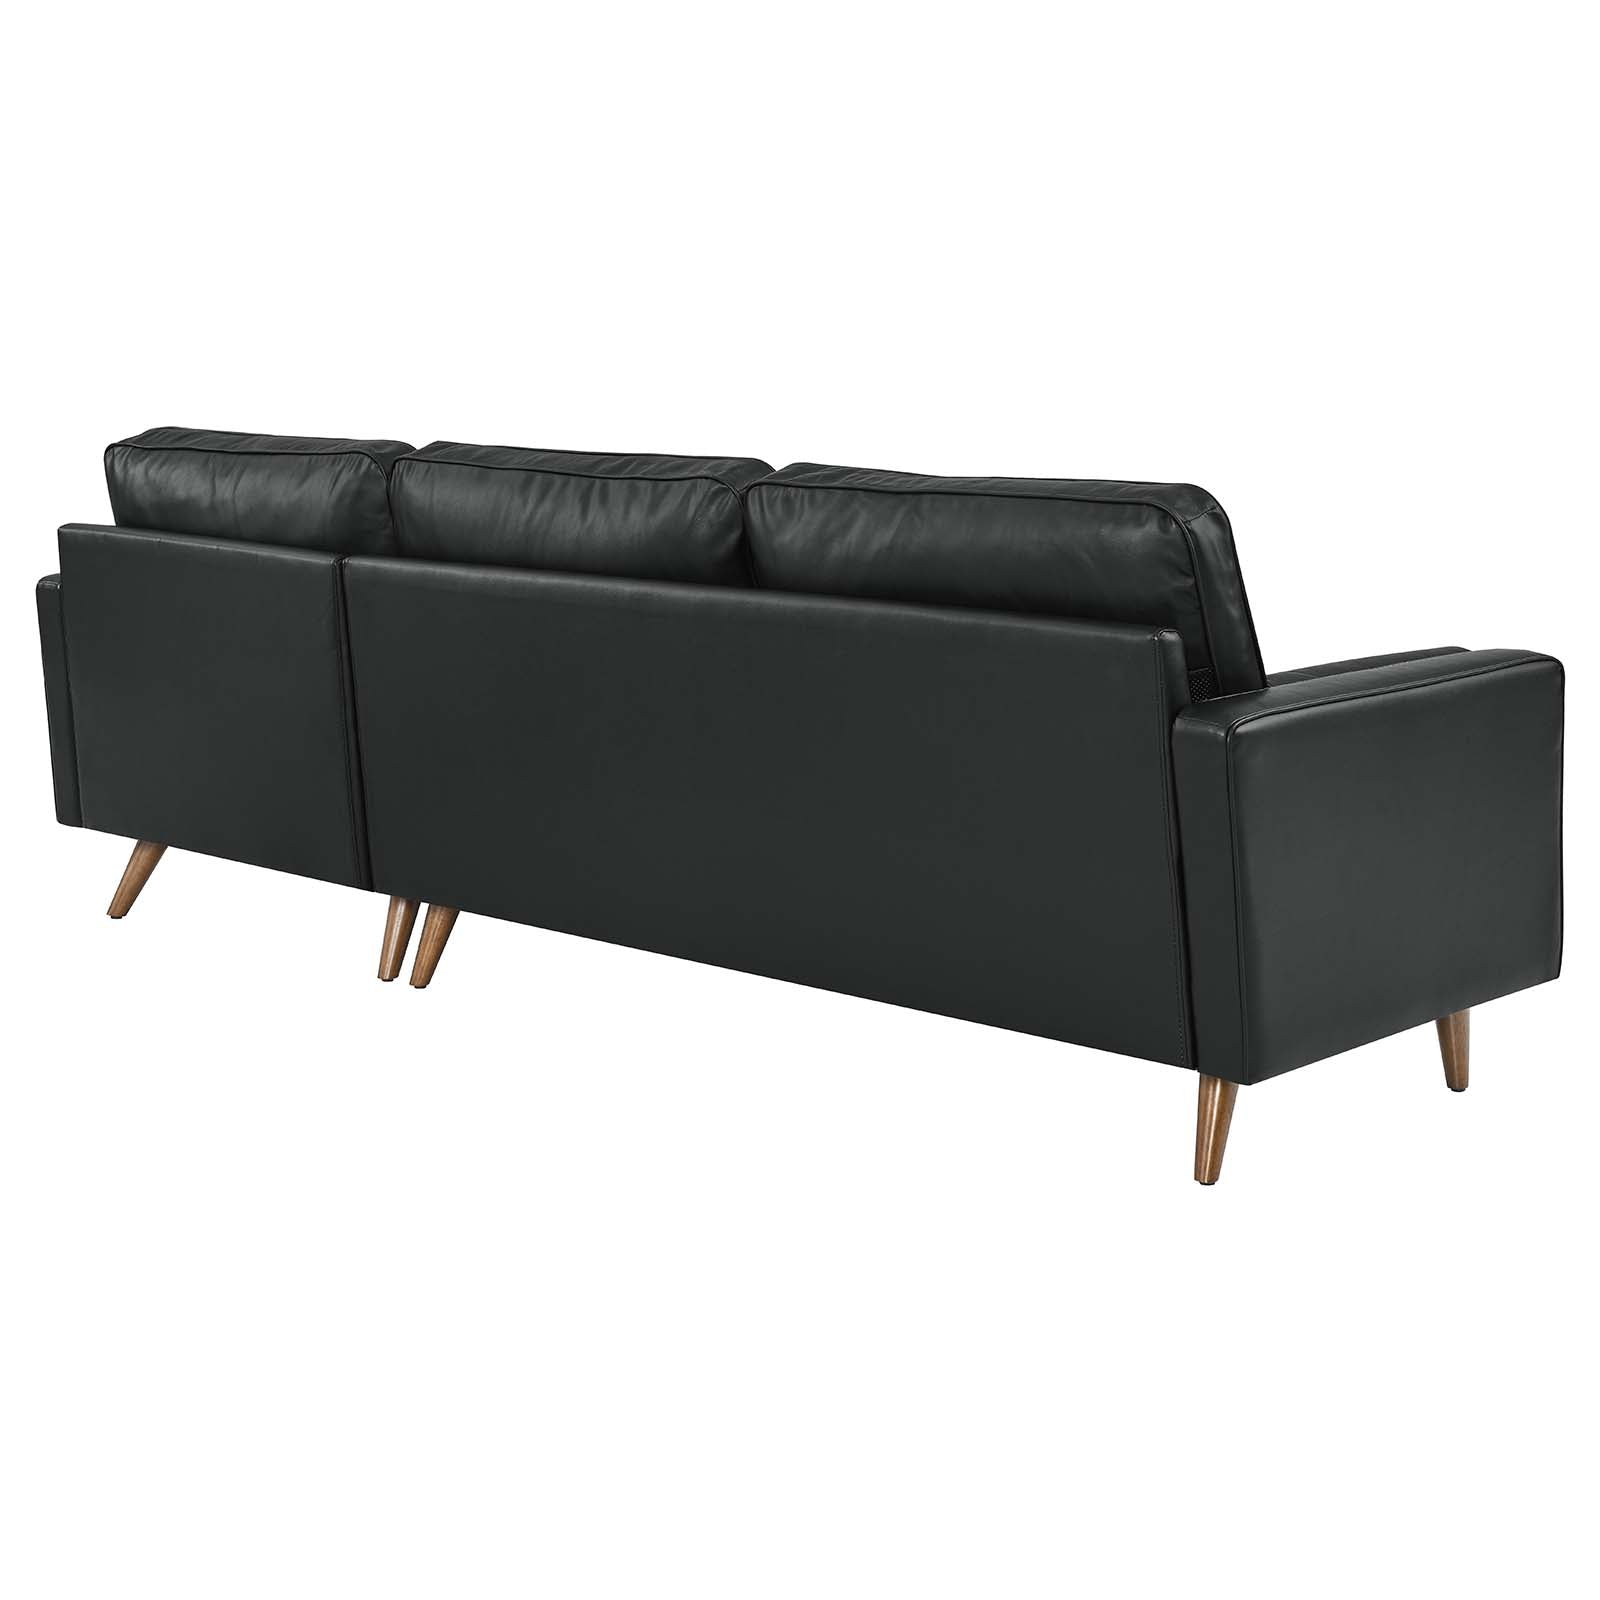 Modway Sectional Sofas - Valour 98" Leather Sectional Sofa Black